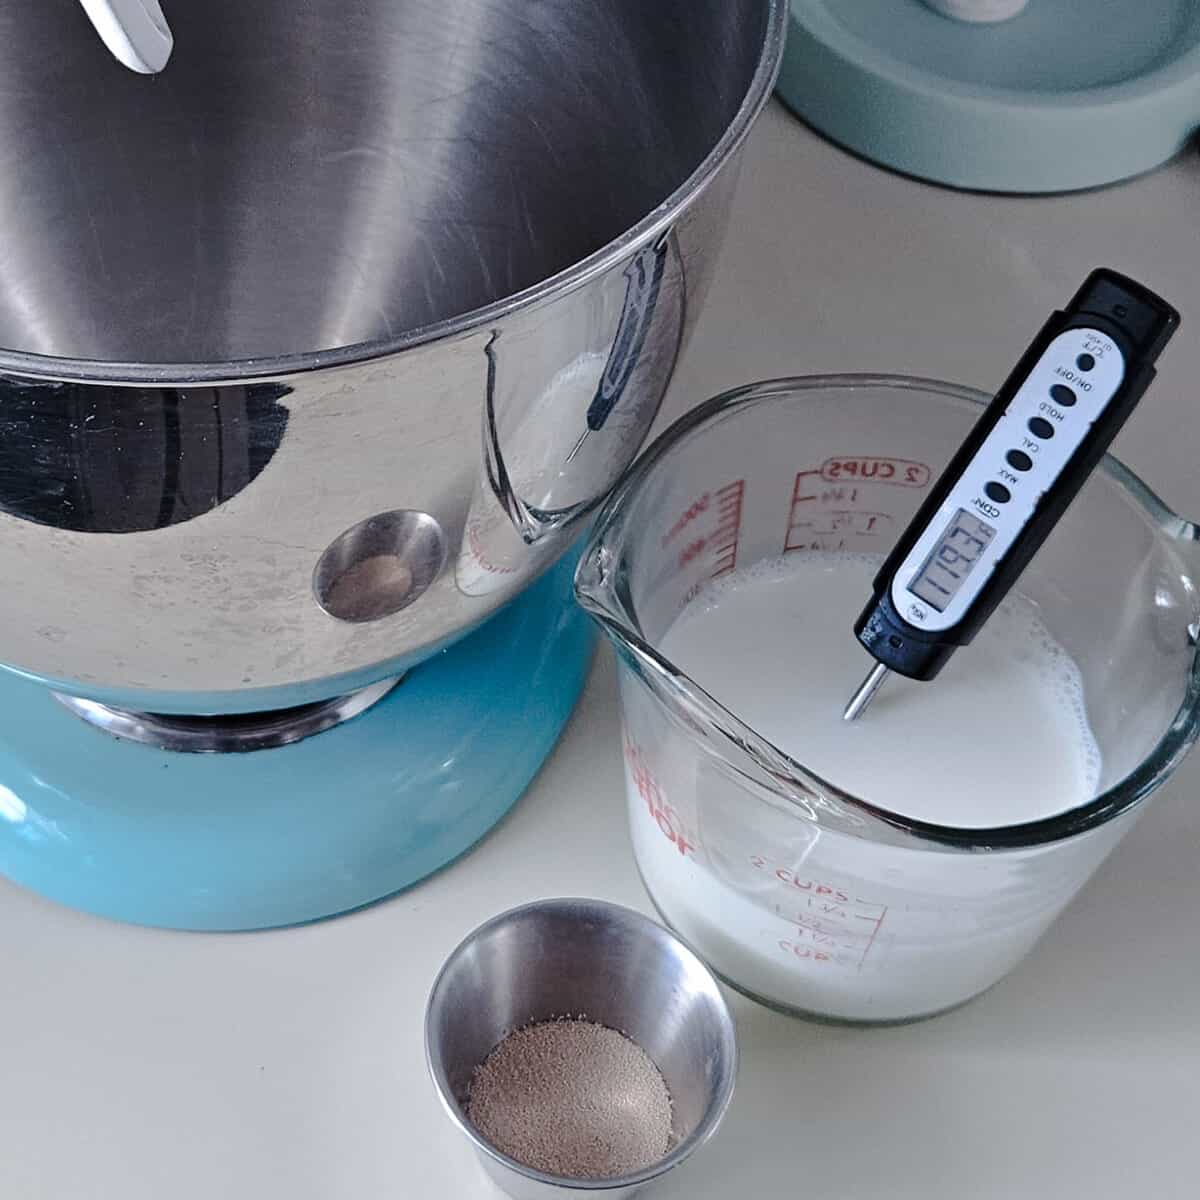 measuring cup with milk in it, measuring to 119.3 degrees F with a digital thermometer, yeast granules to the side in a metal ramekin, stand mixer waiting in the background.